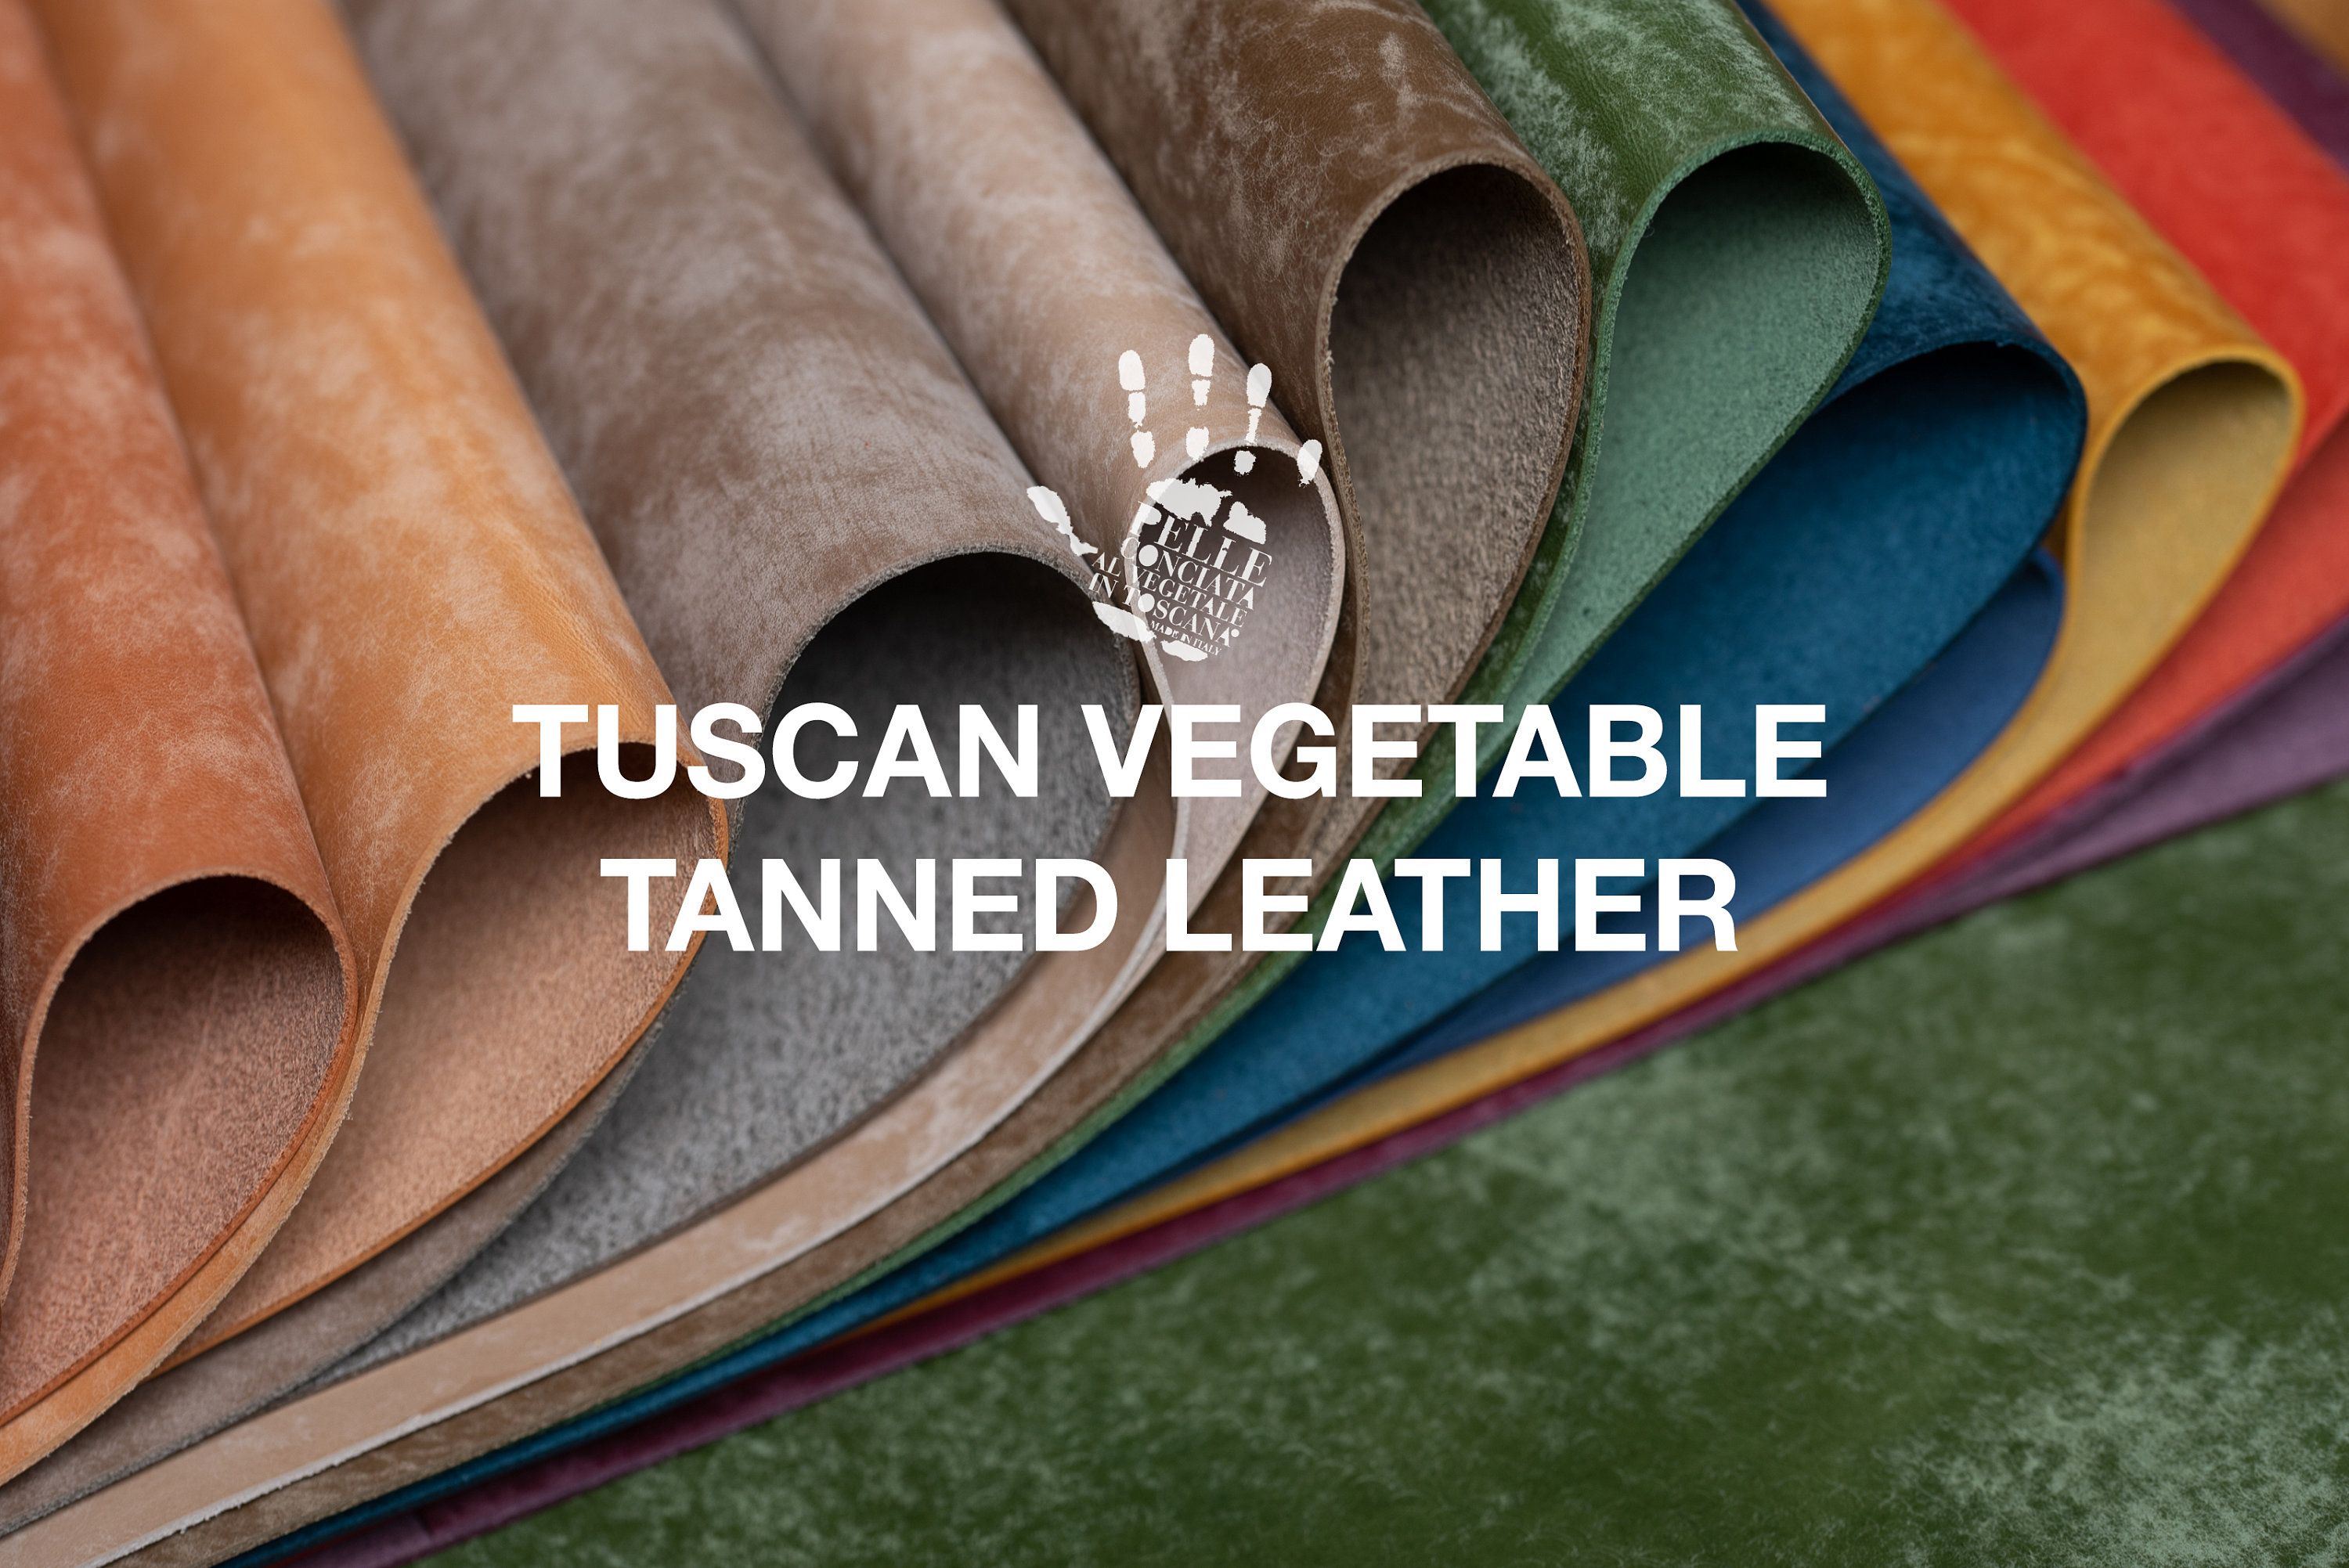 White Veg Tanned Leather belly, Calf Skin for Belts, Sandals, Straps,  Leather Bags, Genuine Italian Leather, Thick-durable Leather Hides 